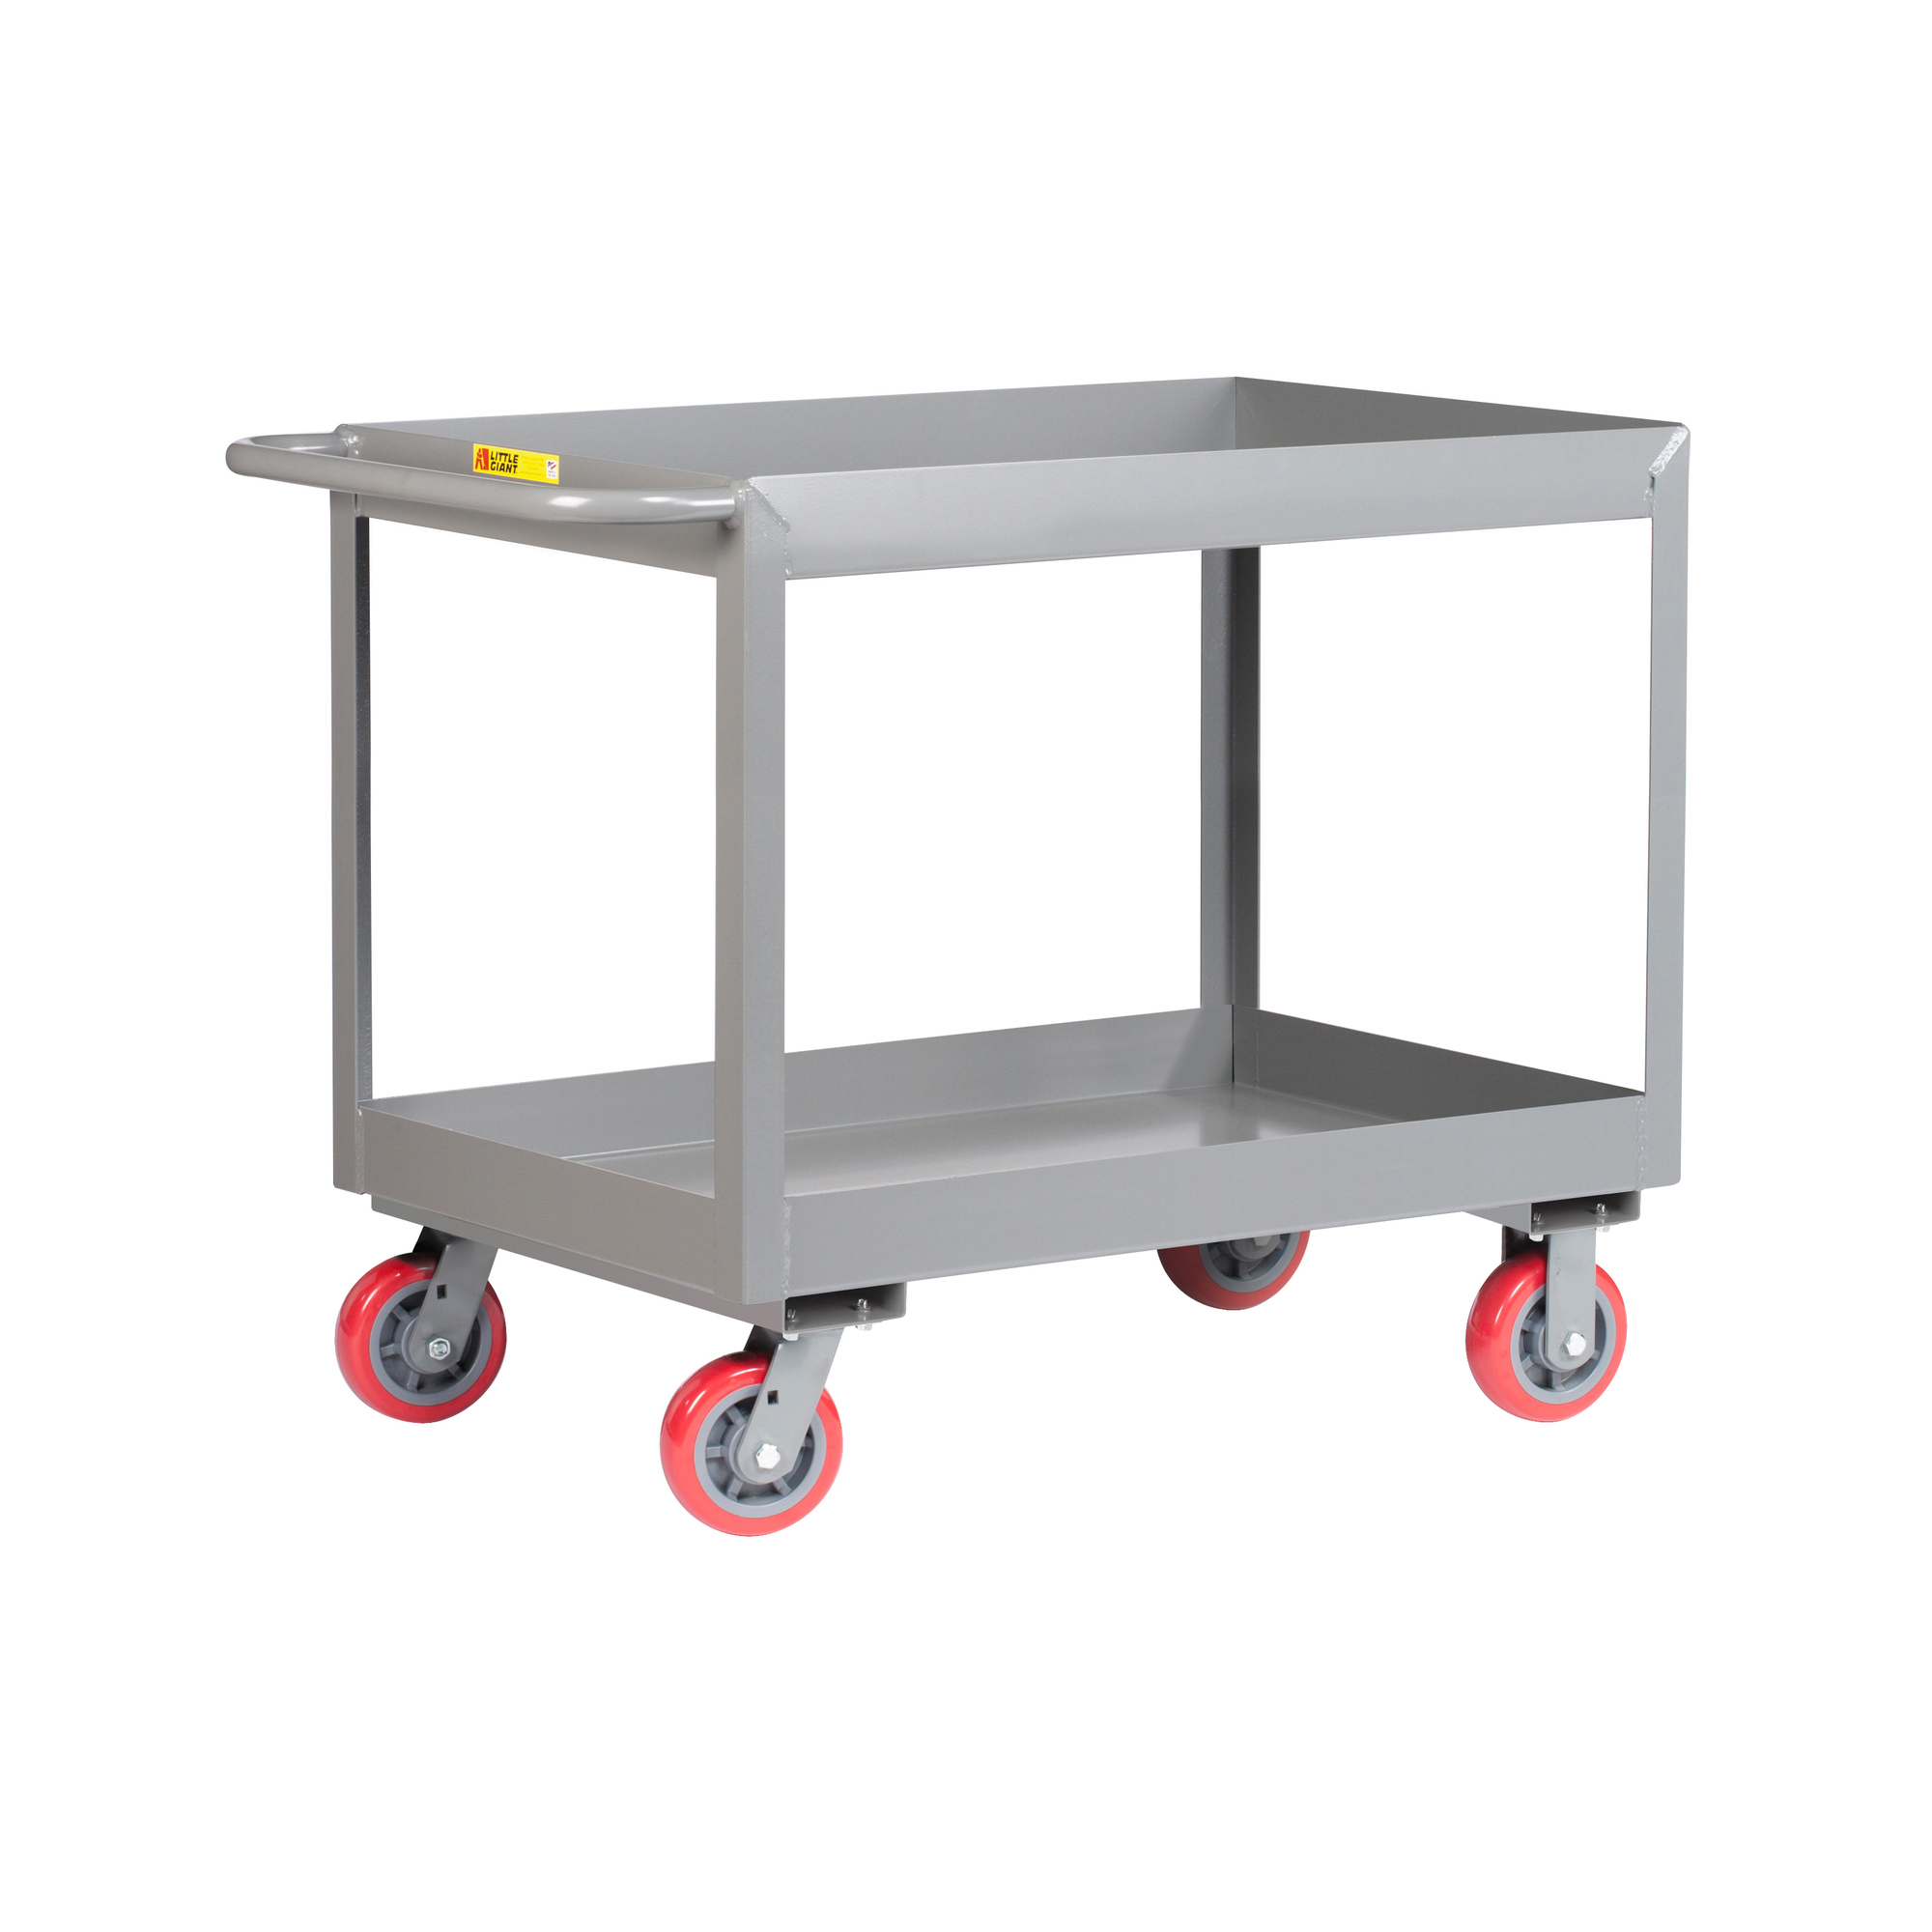 Little Giant, 3Inch Deep Shelf Truck, 30x60, 3600 lbs, Total Capacity 3600 lb, Shelves (qty.) 2, Material Carbon Steel, Model DS-3060-X3-6PY